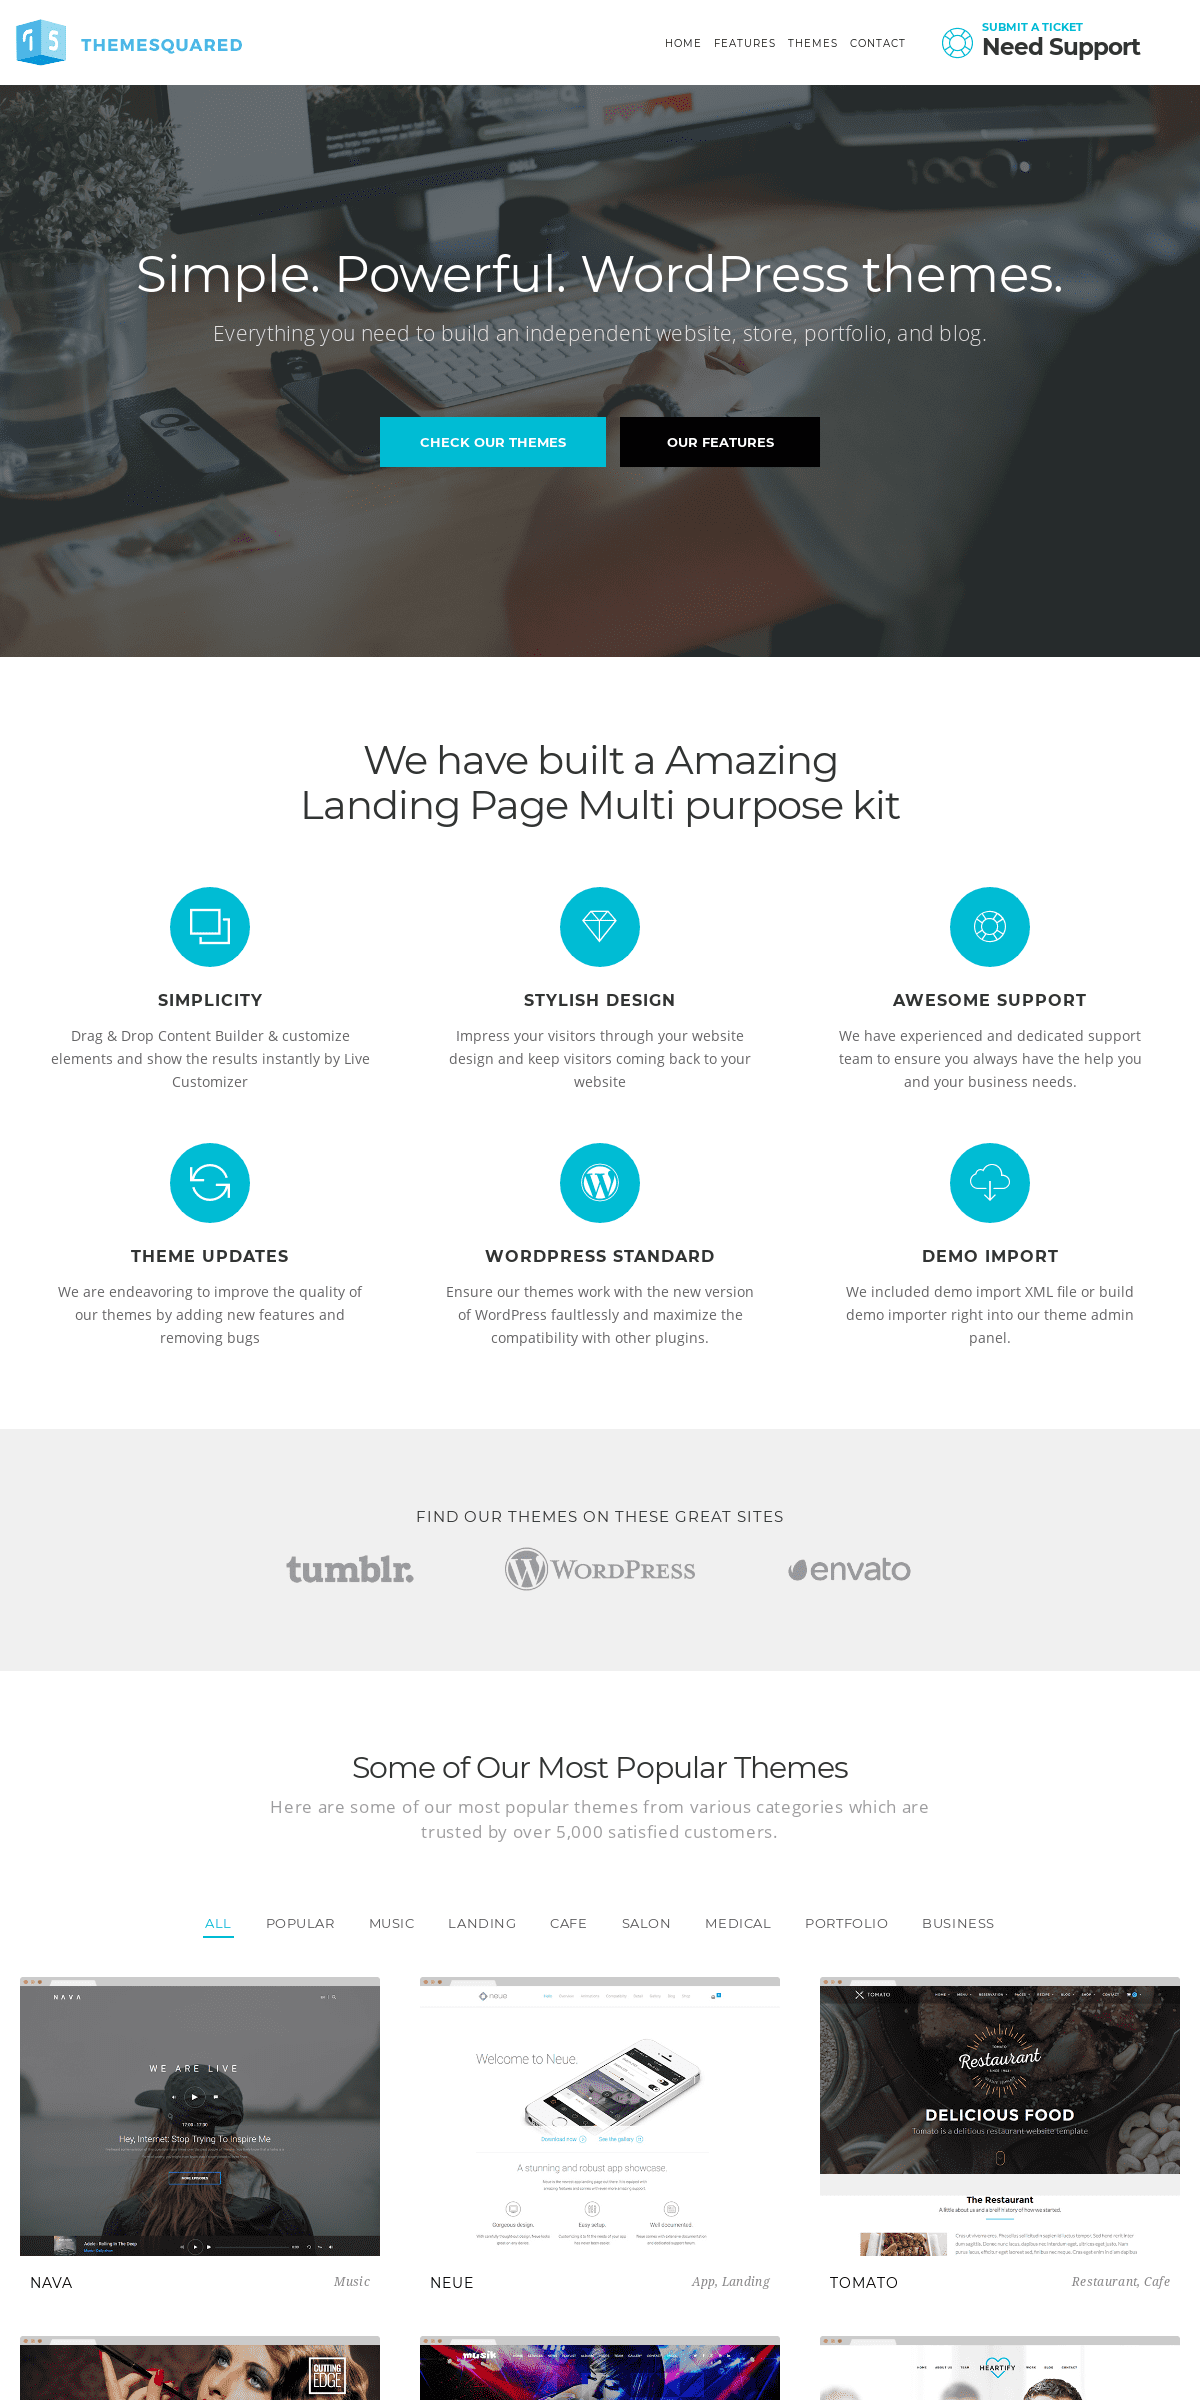 A complete backup of themesquared.com